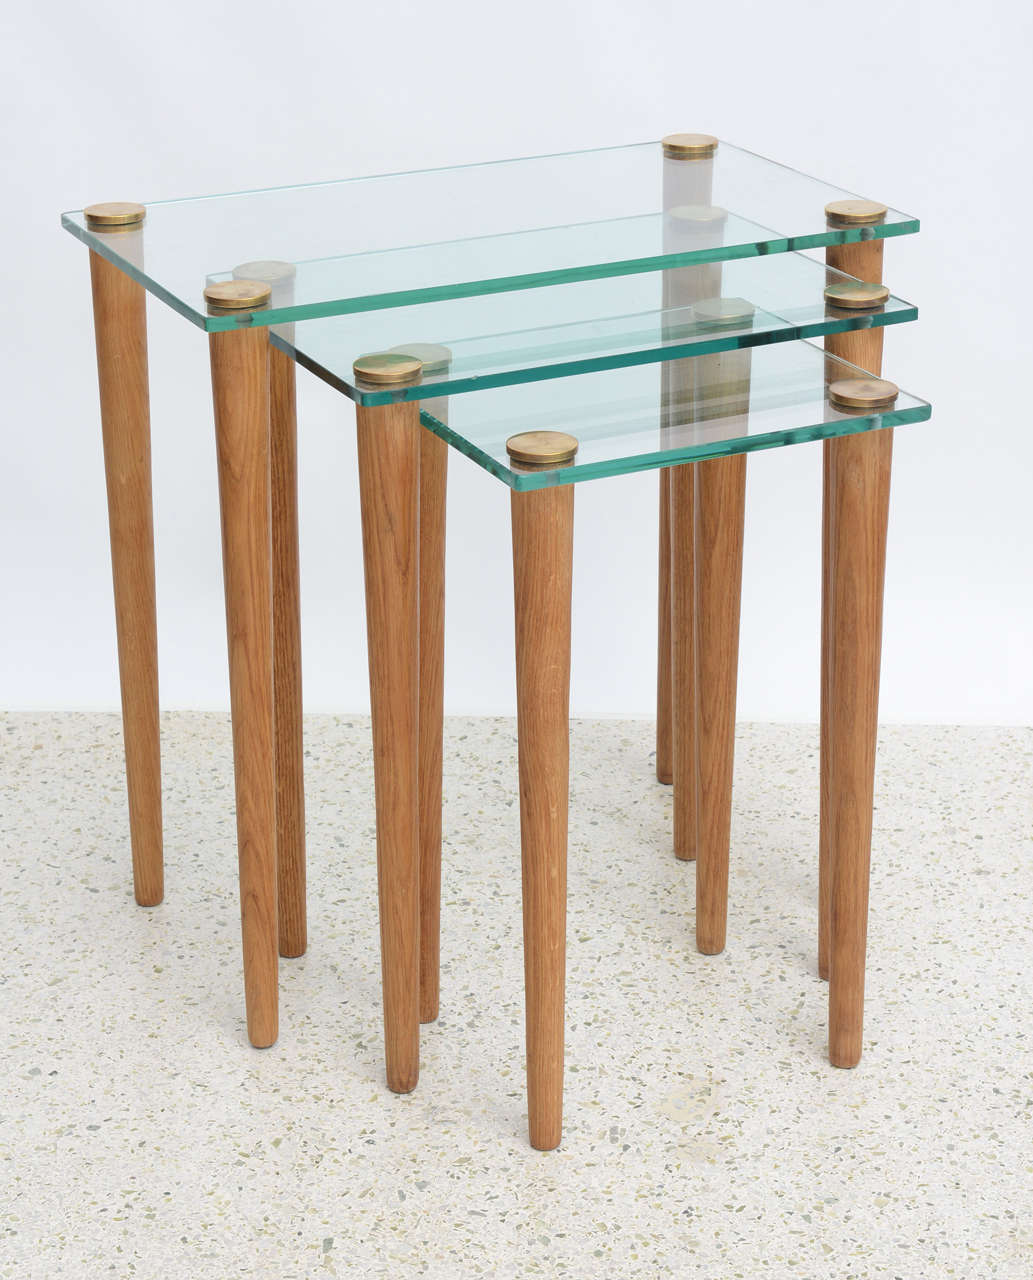 The glass tops with brass caps and round tapering legs.
Measures: Smallest table is 13.25” W x 11” D x 22” H.
Gilbert Rohde.